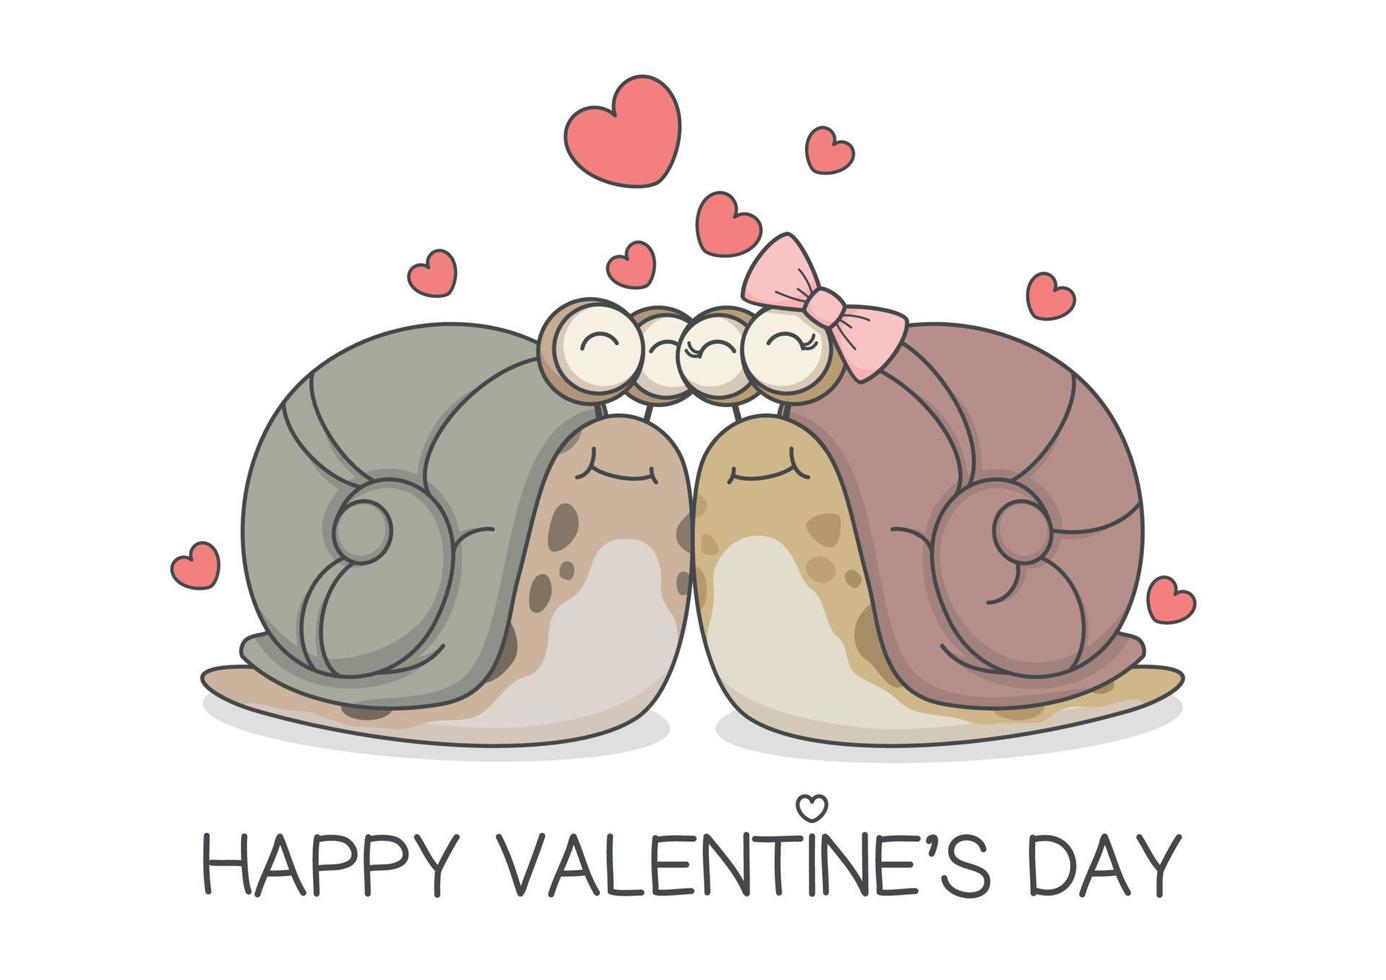 Cute Valentines Day Snails Couple vector